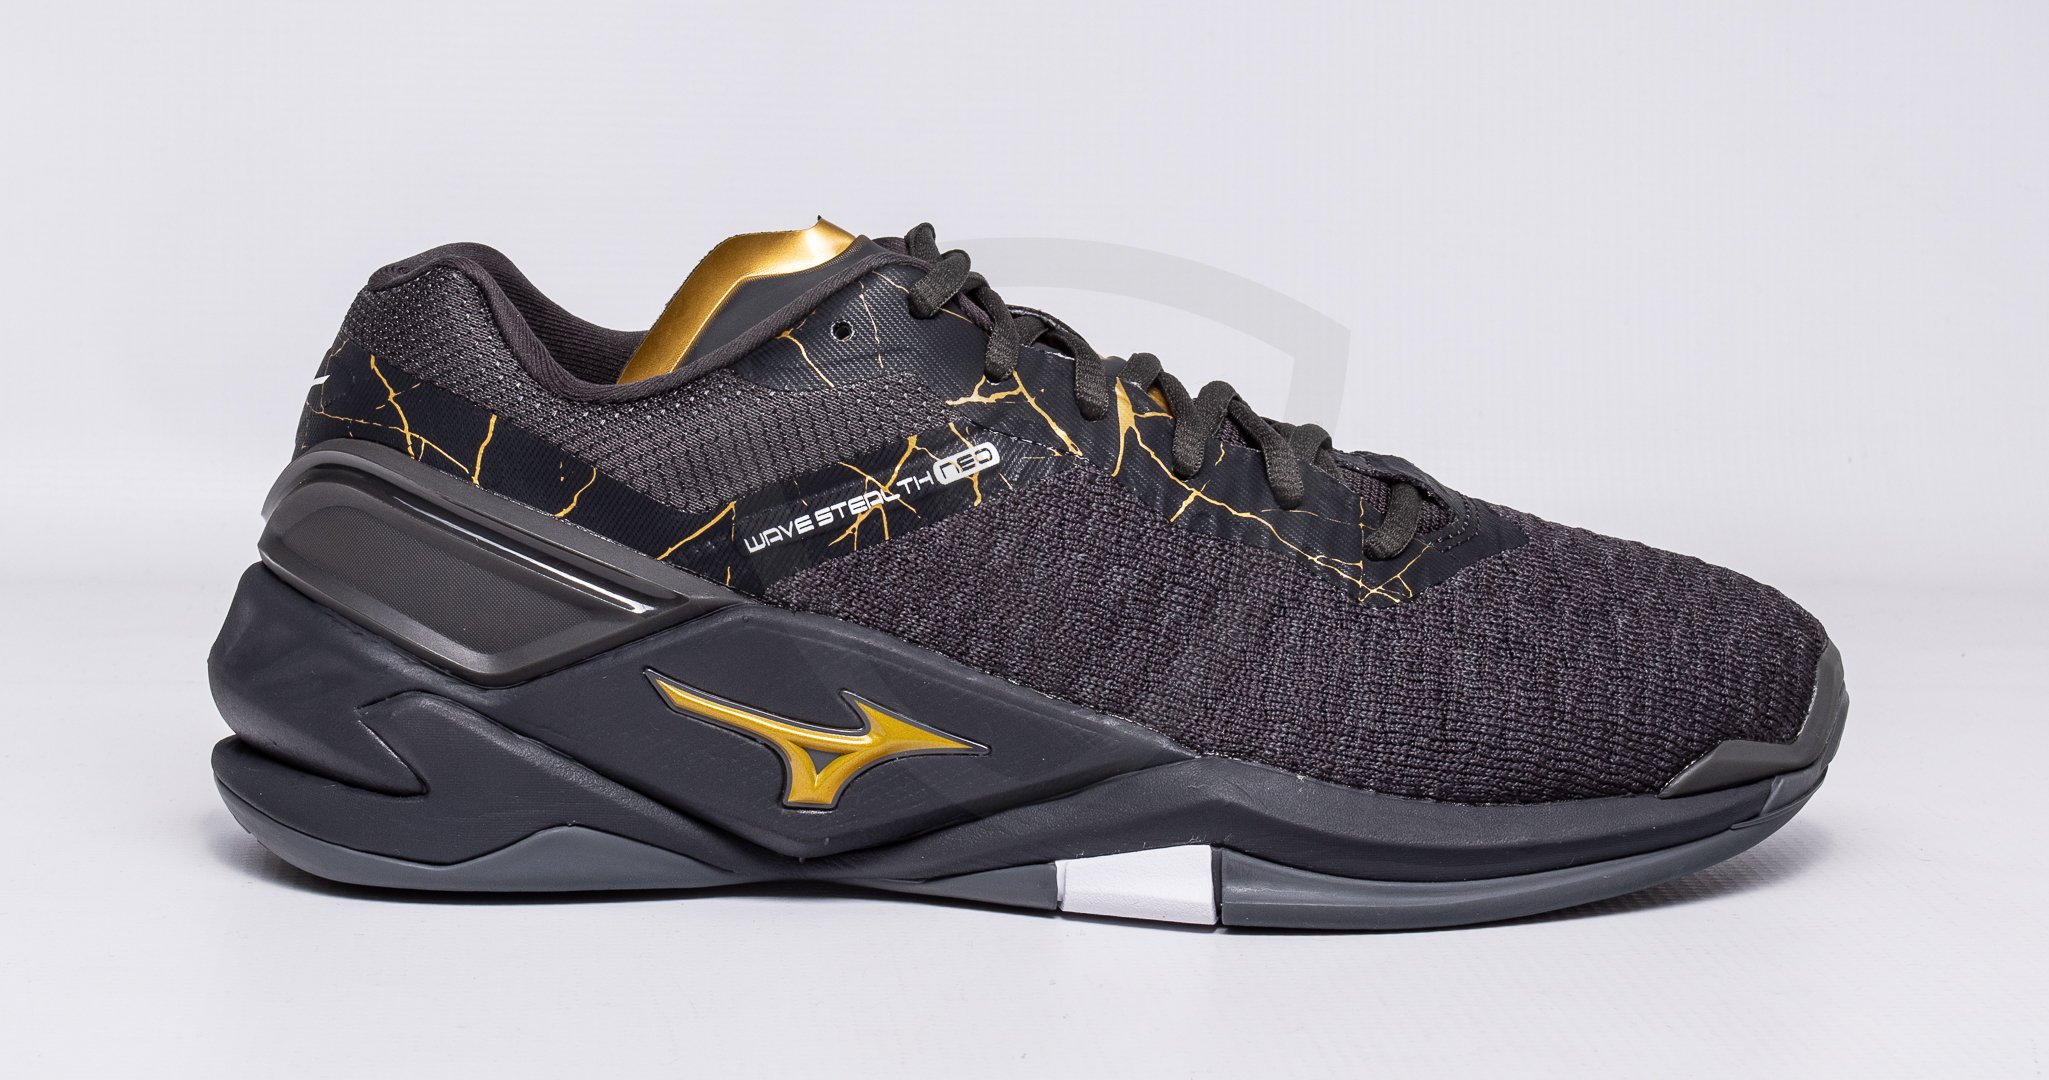 Mizuno WAVE STEALTH NEO BlkOyster-MPGold-IronGat UK 10,5 / US 11,5 / EUR 45 / CM 29,5